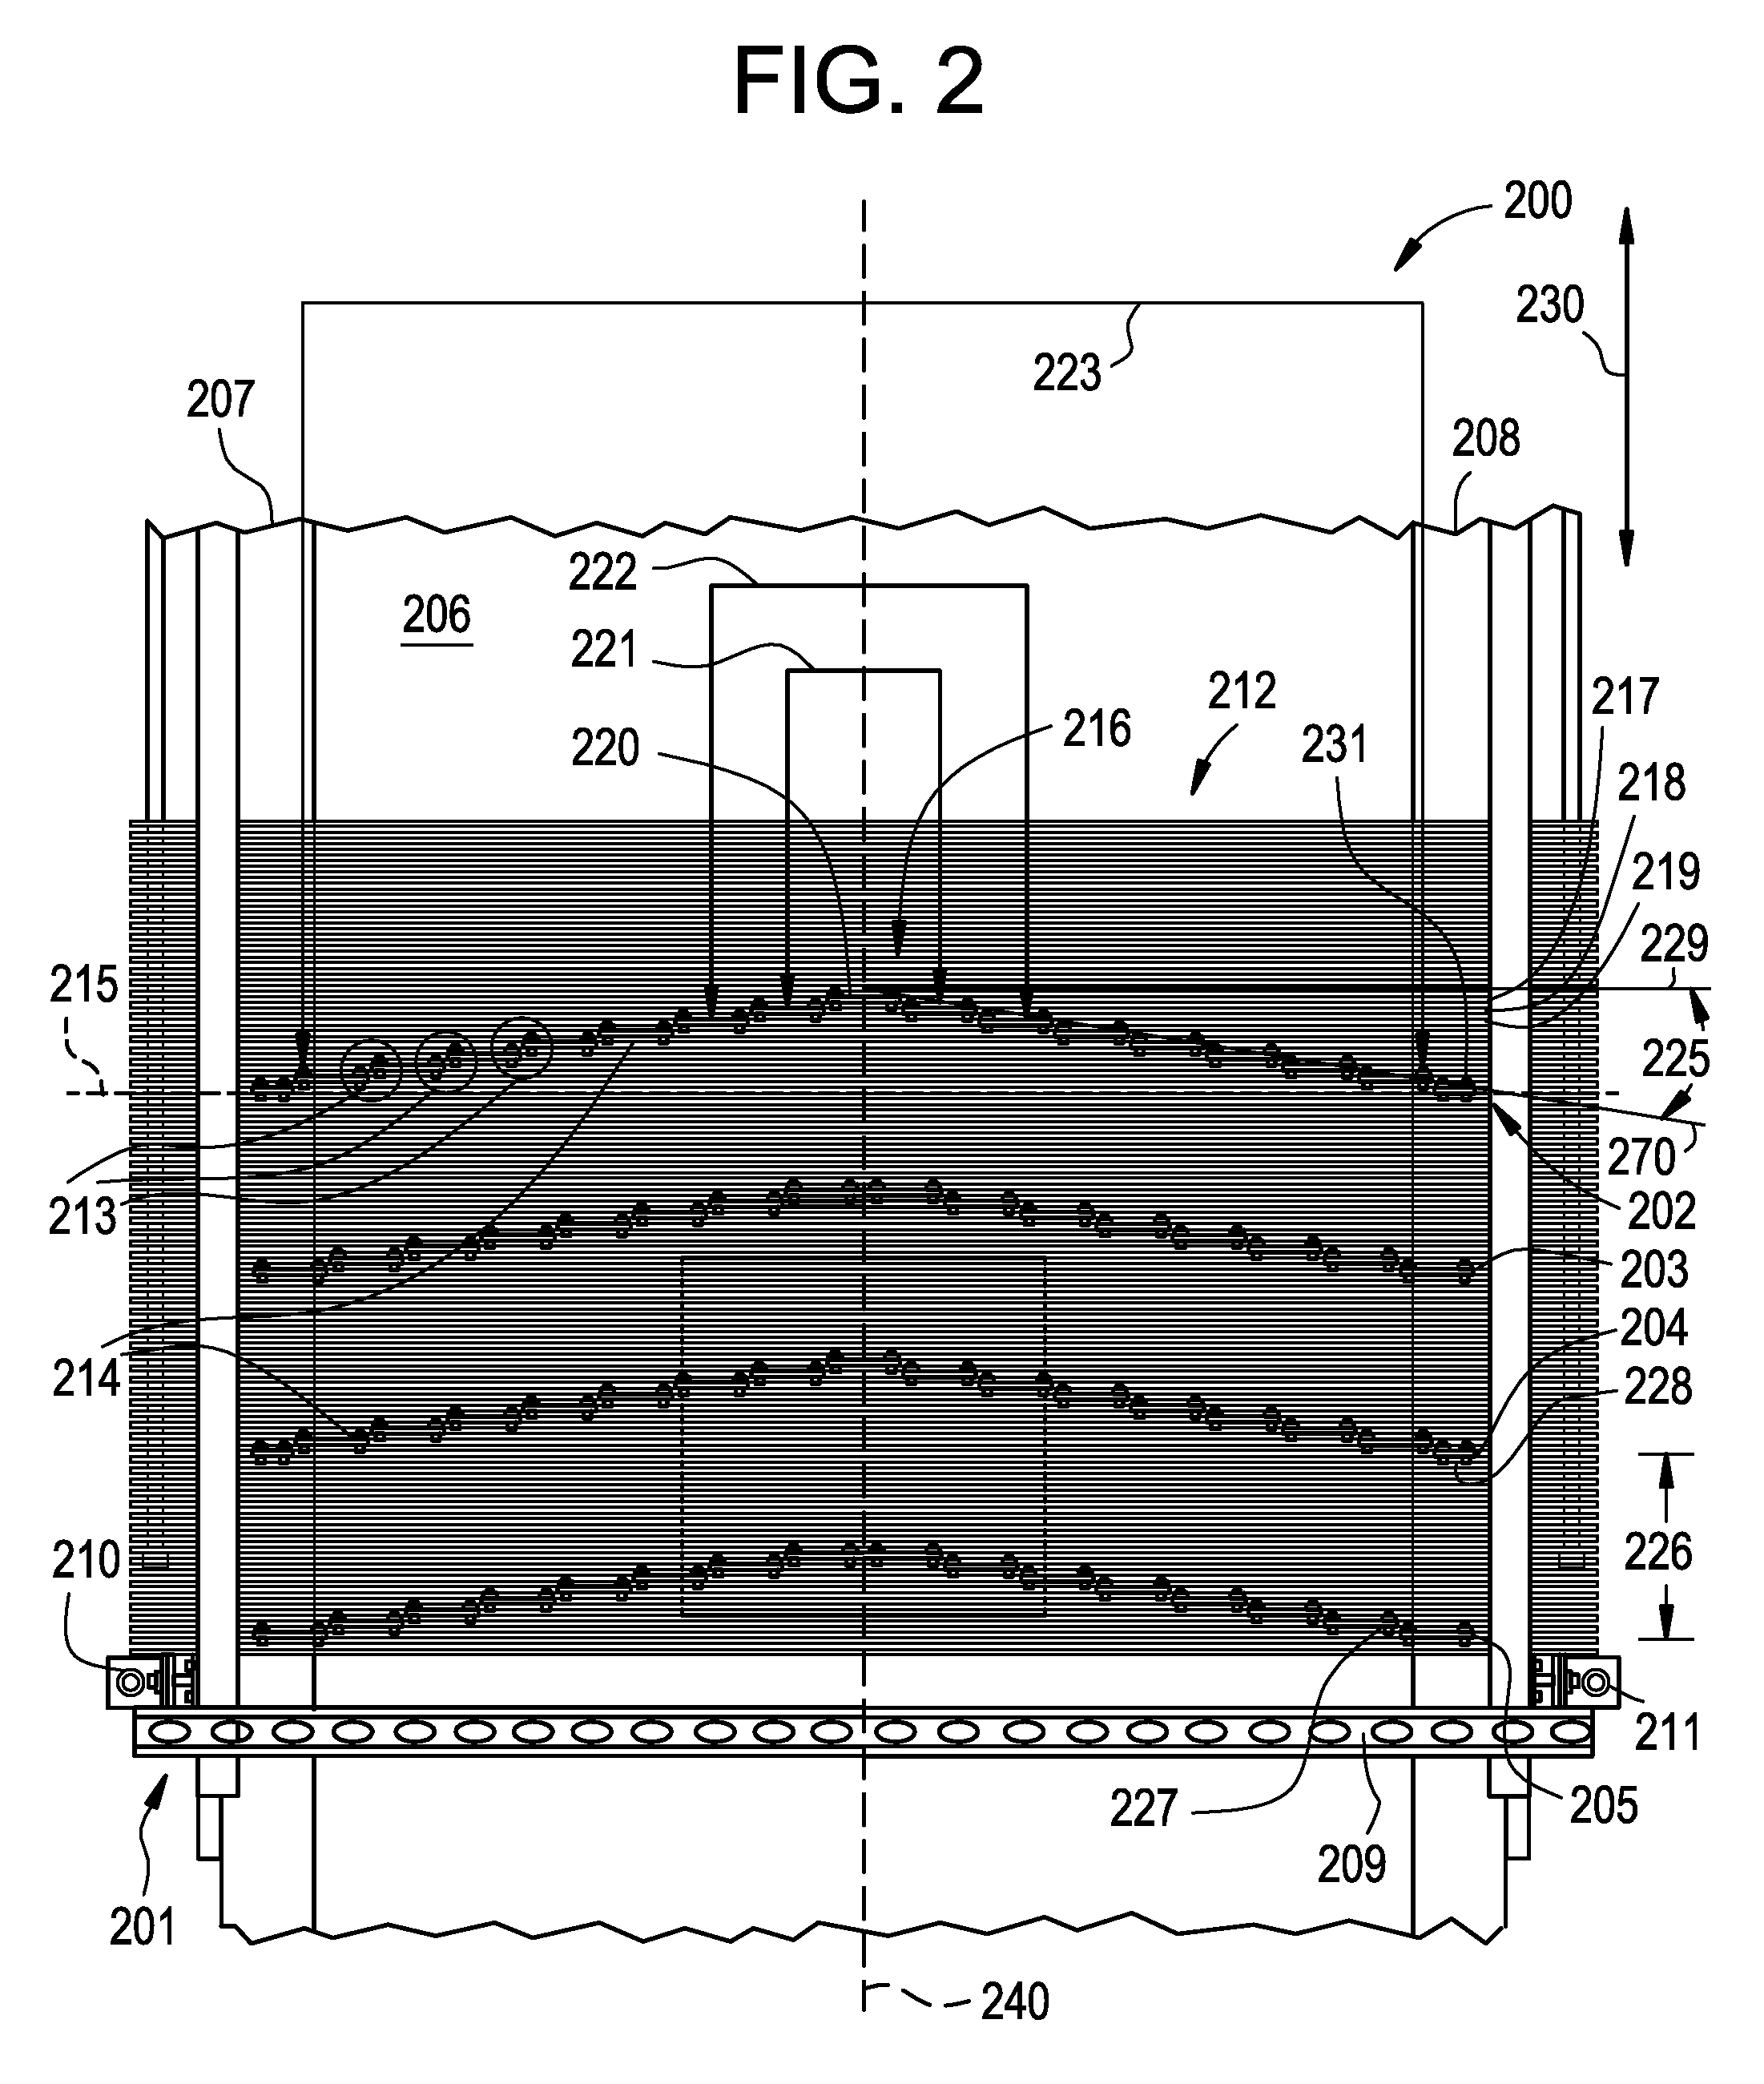 Method and apparatus for providing radiation shielding for non-invasive inspection systems